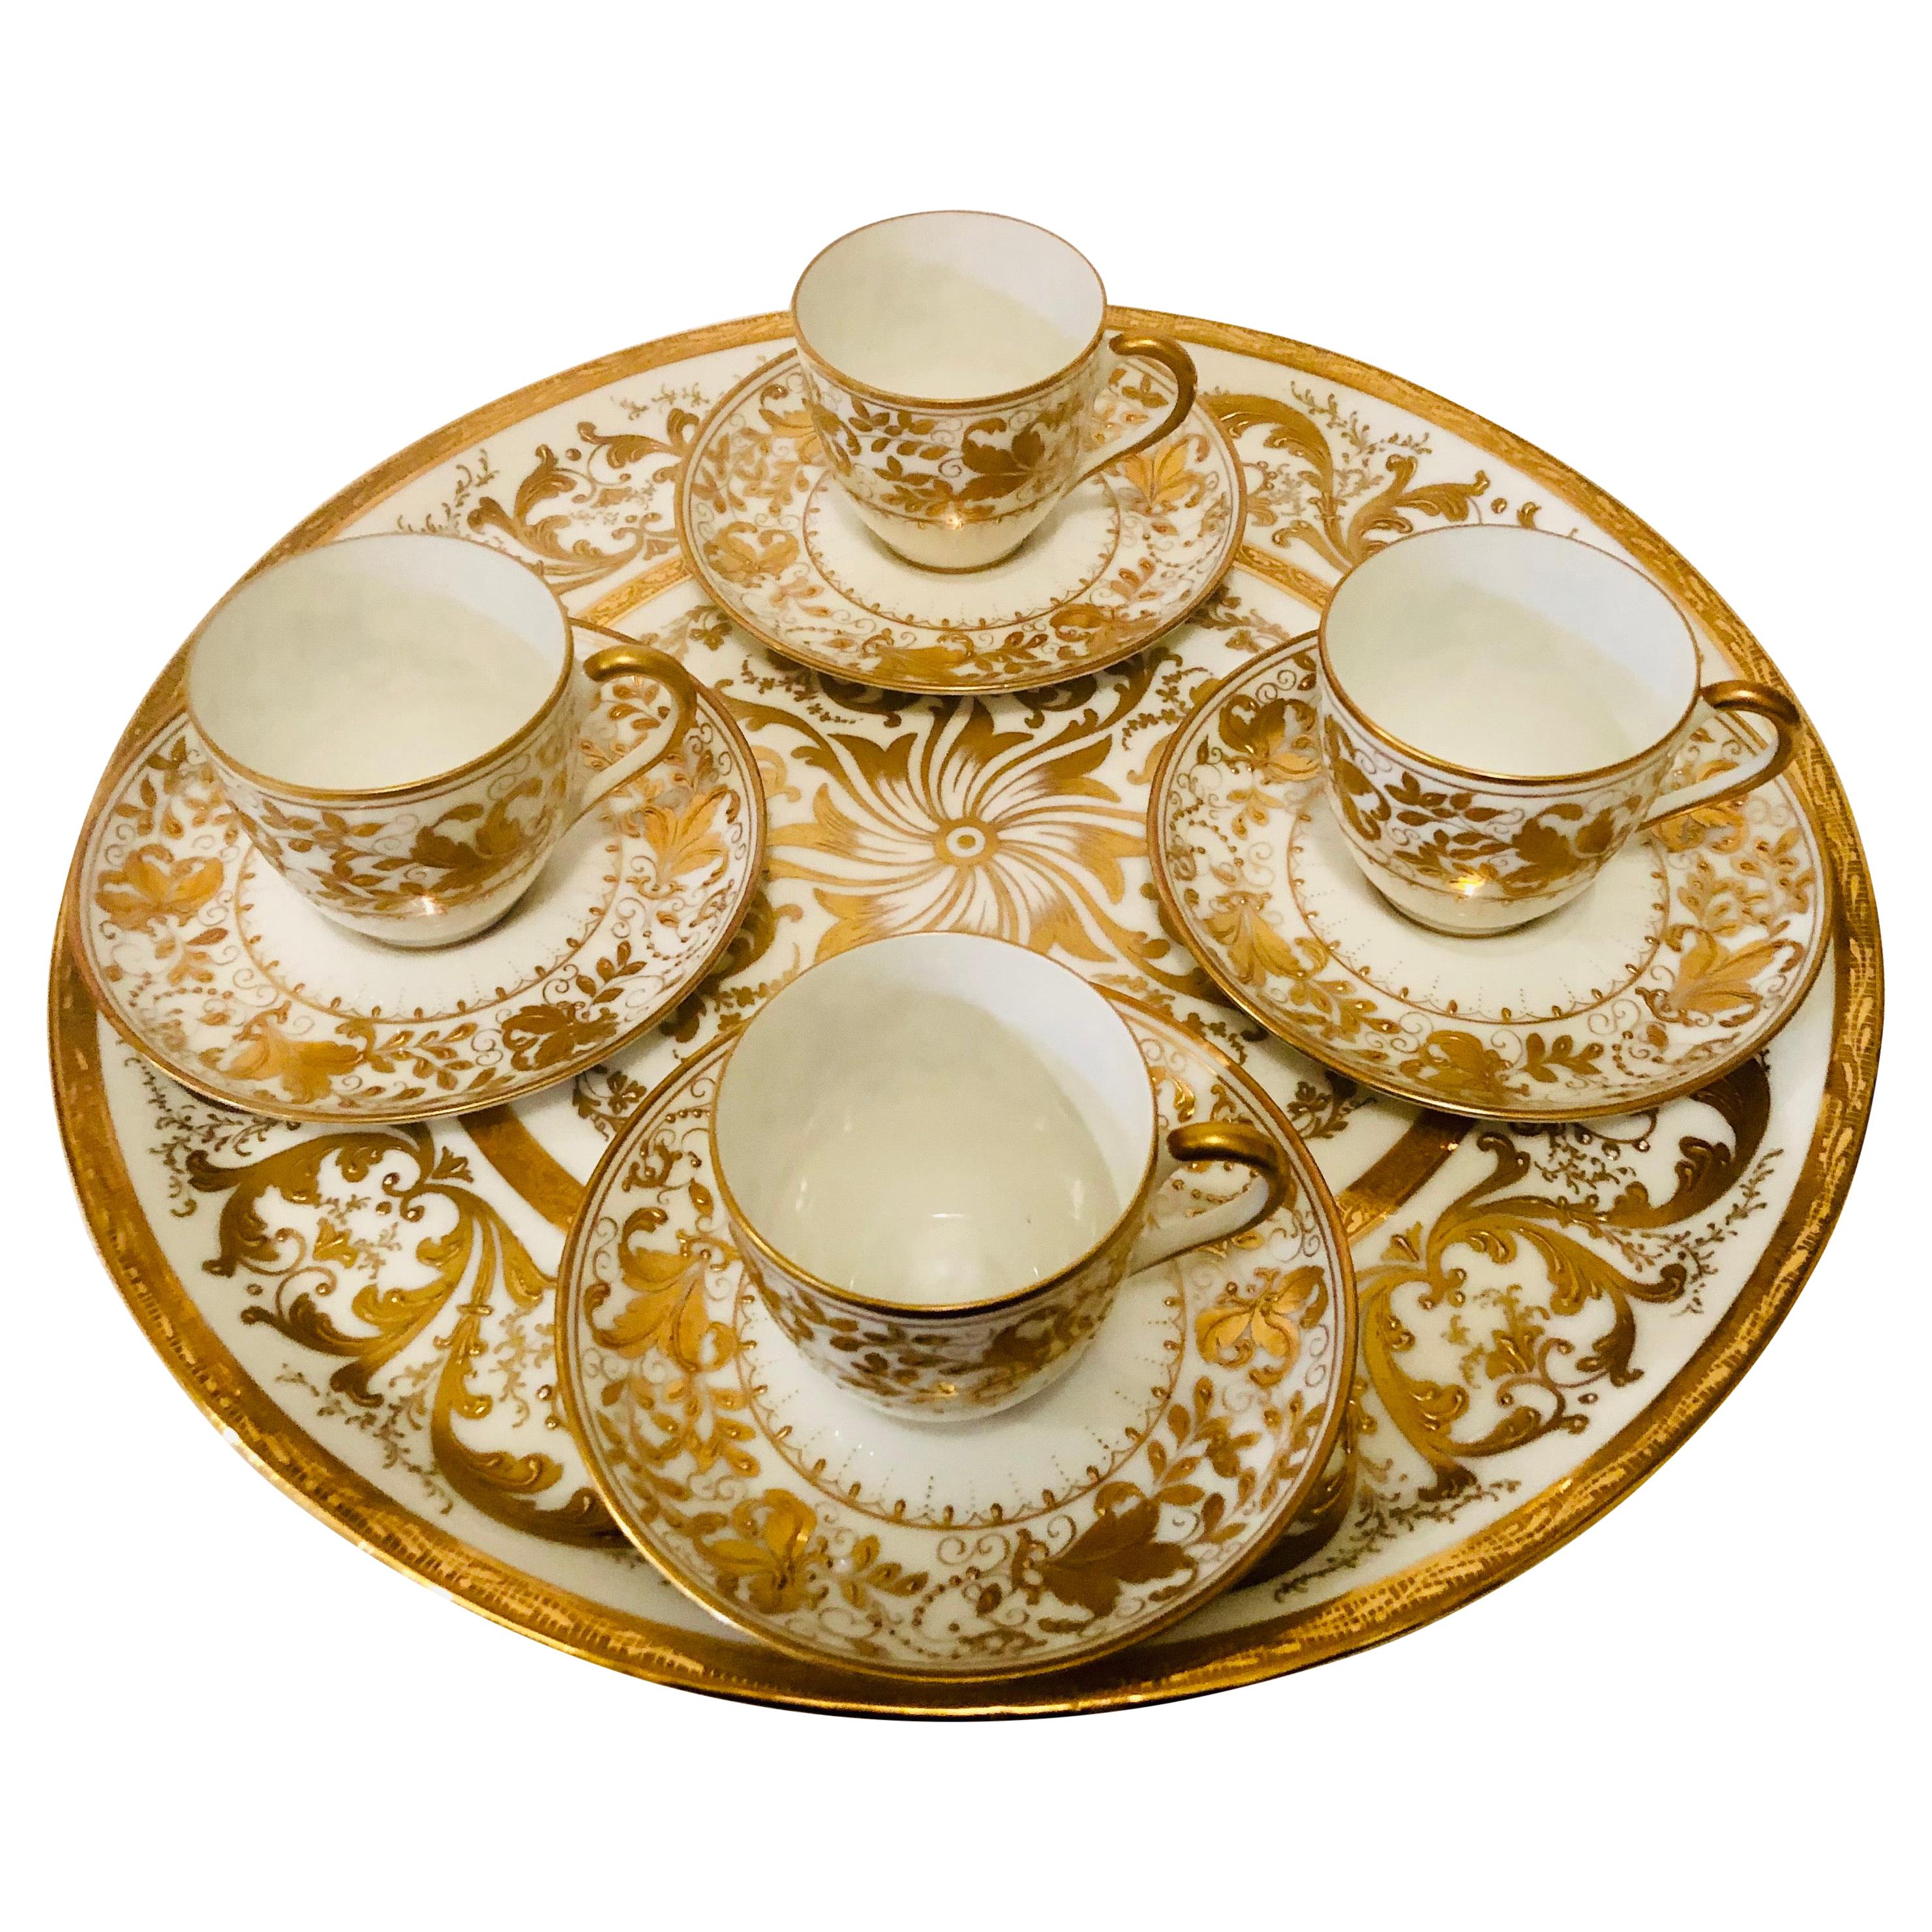 Le Tallec Set of 4 Demitasse Cups and Matching Tray with Profuse Raised Gilding